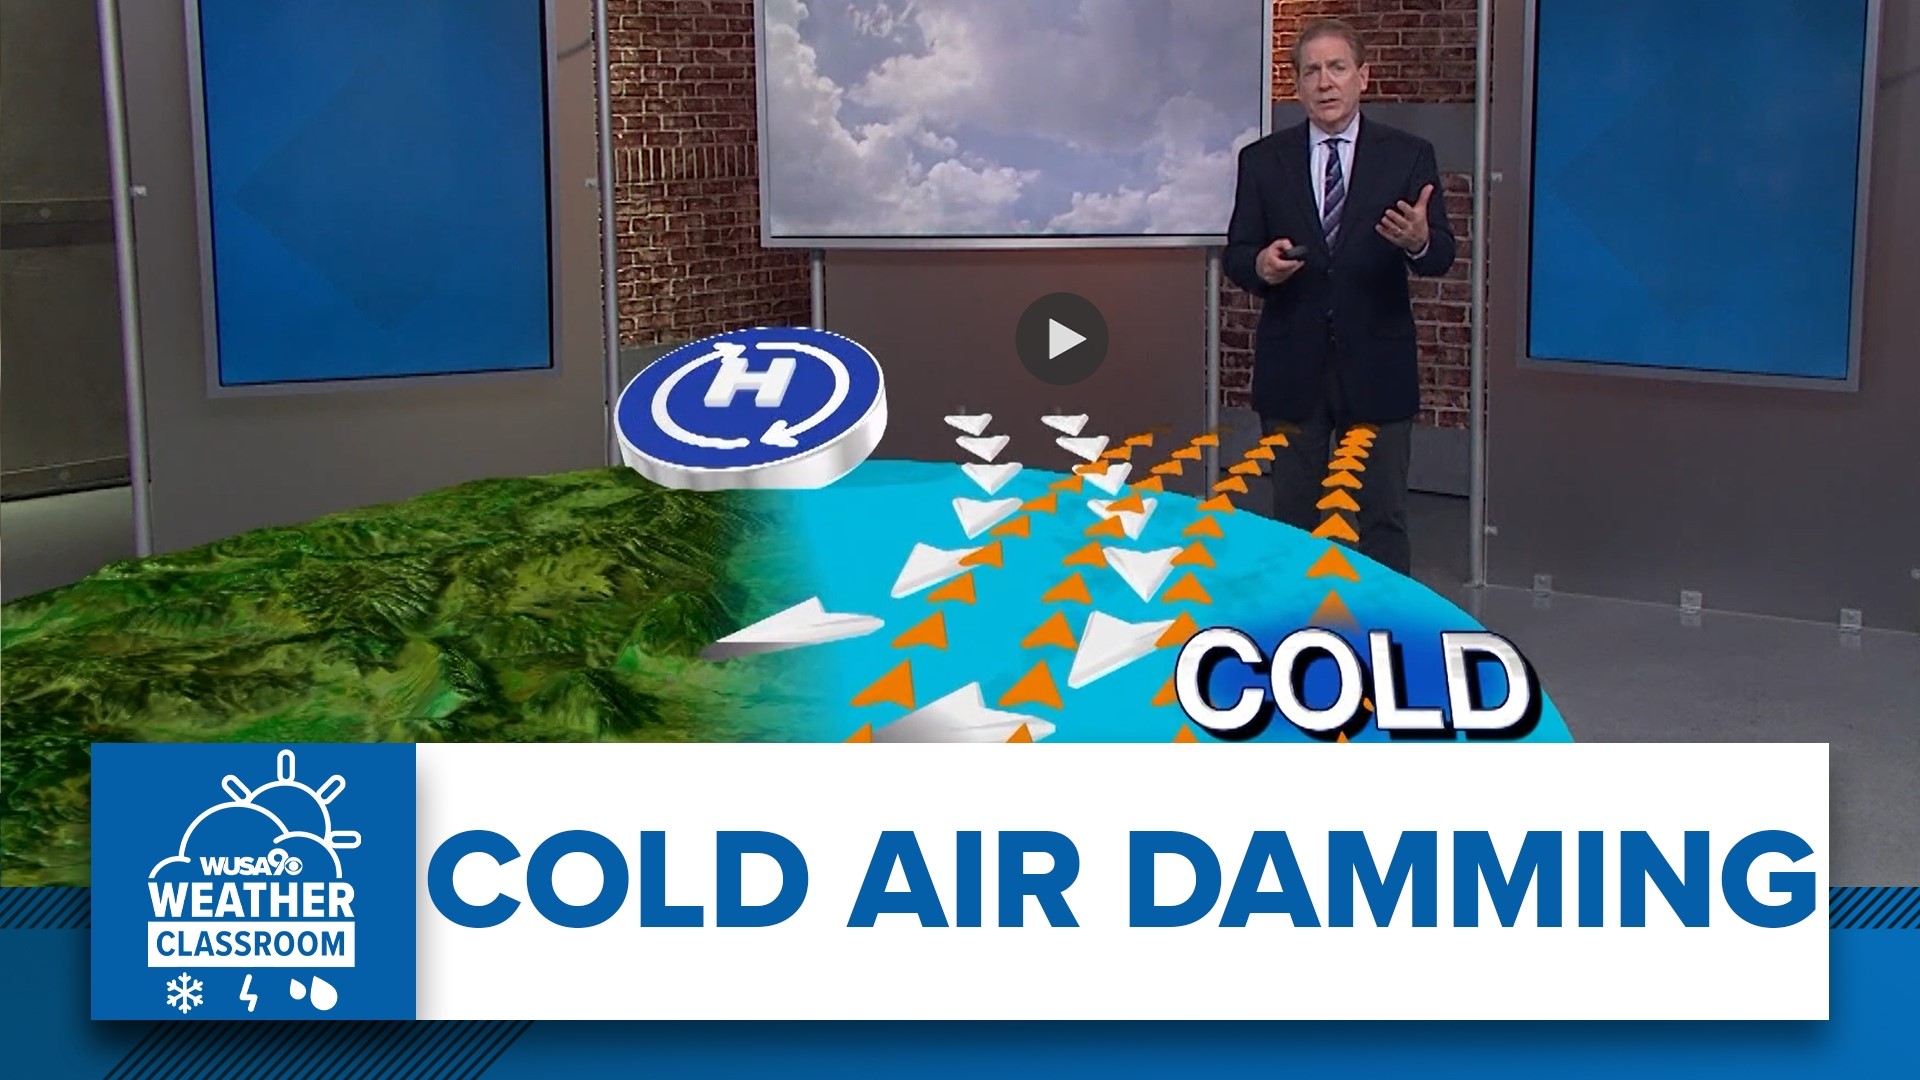 Meteorologist Topper Shutt explains what cold air damming is and what it means for you.